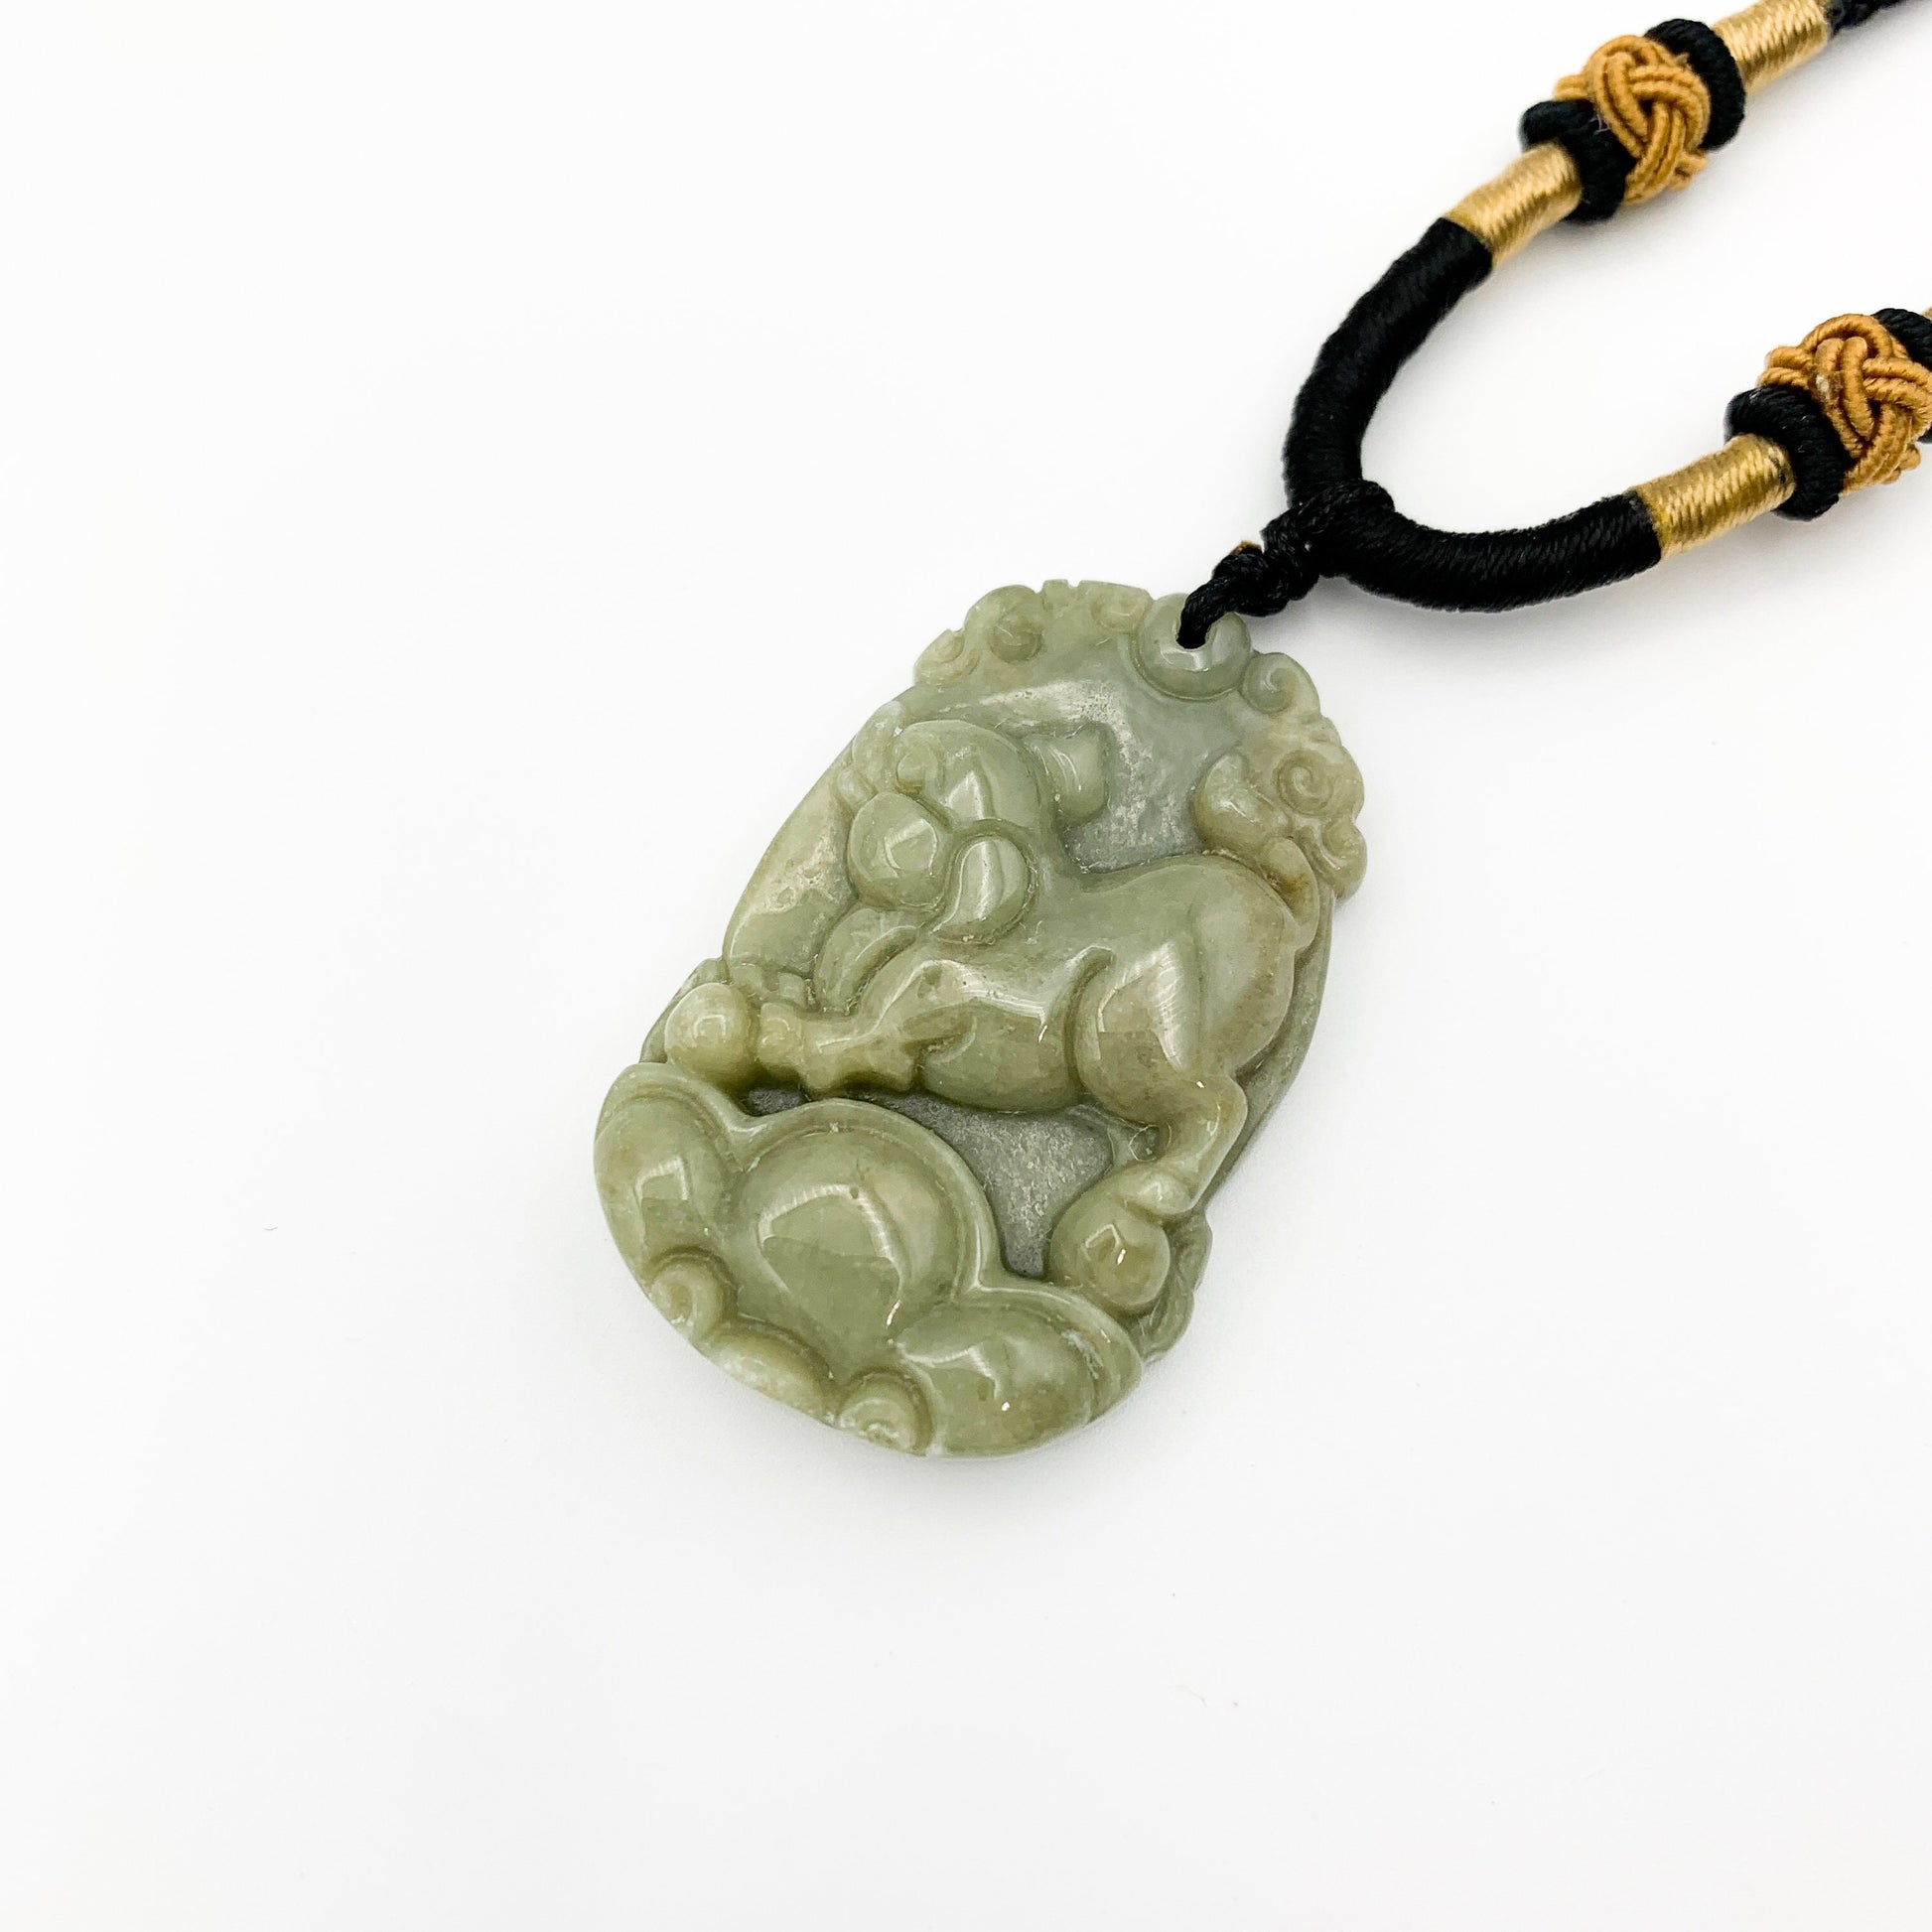 Jadeite Jade Pig Boar Chinese Zodiac Carved Rustic Pendant Necklace, YW-0110-1646605343 - AriaDesignCollection